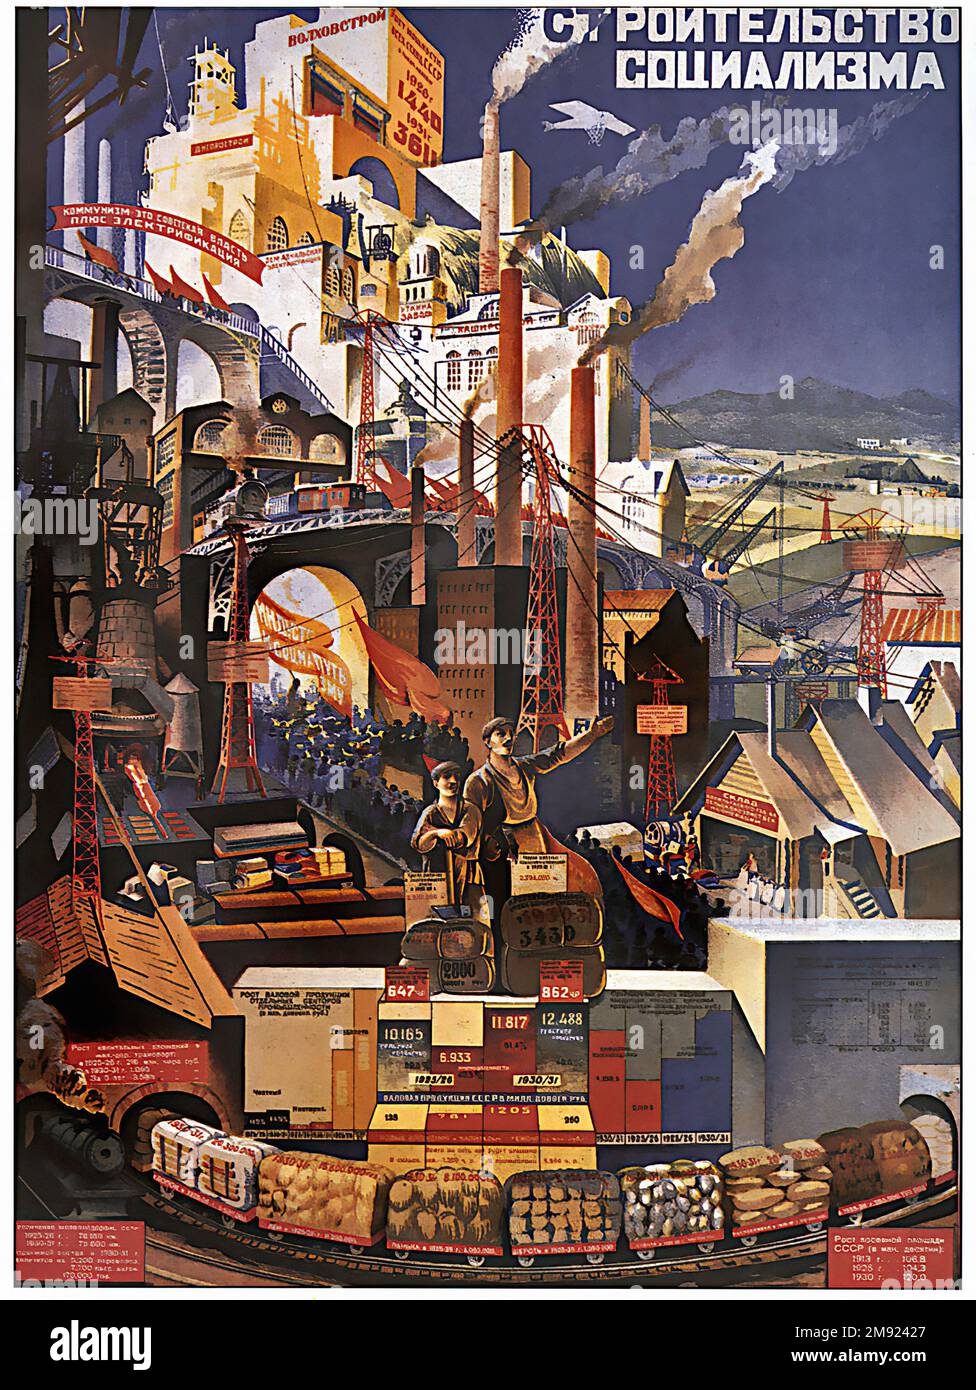 The Construction Of Socialism    (Translated from Russian) - Vintage USSR soviet propaganda poster Stock Photo